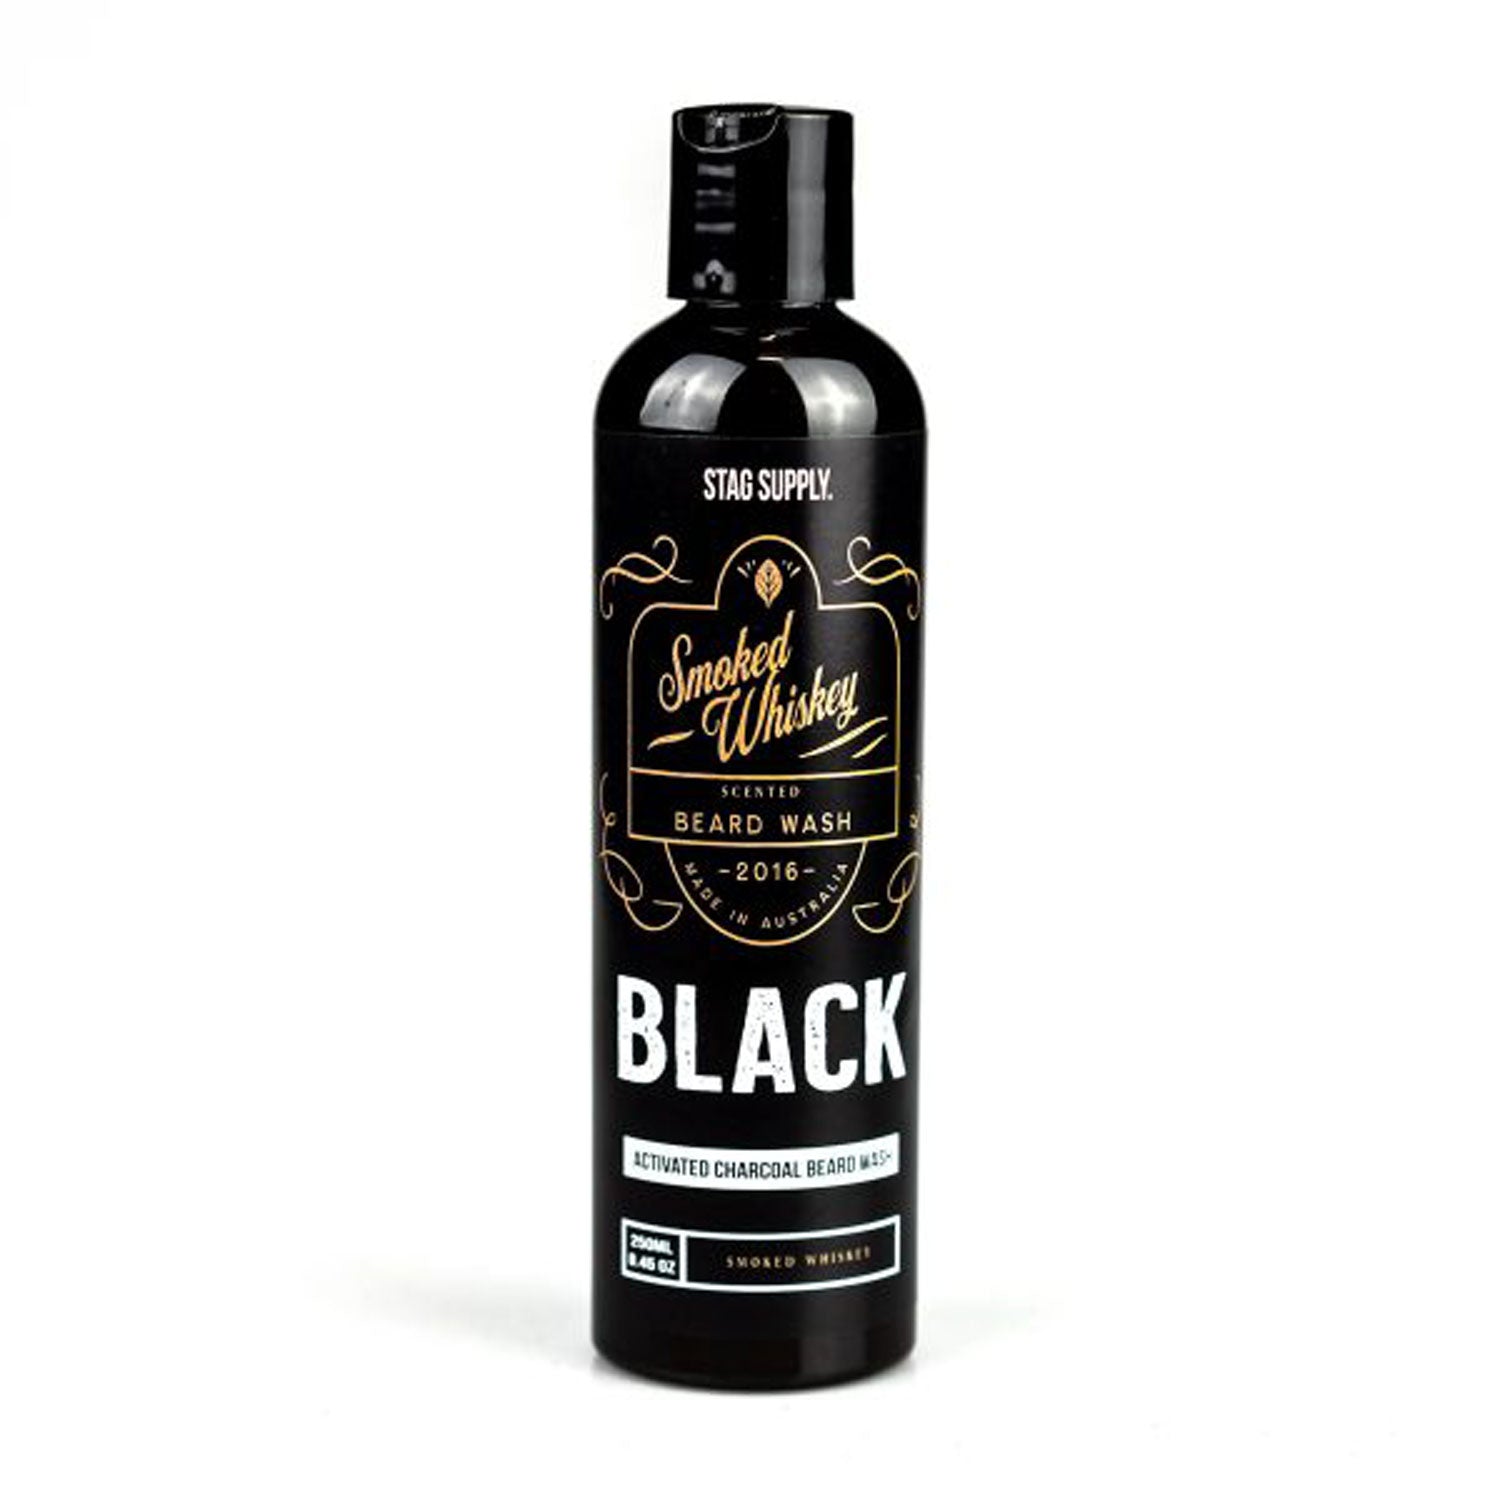 Stag Supply Smoked Whiskey Activated Charcoal Beard Wash 250ml - Orcadia